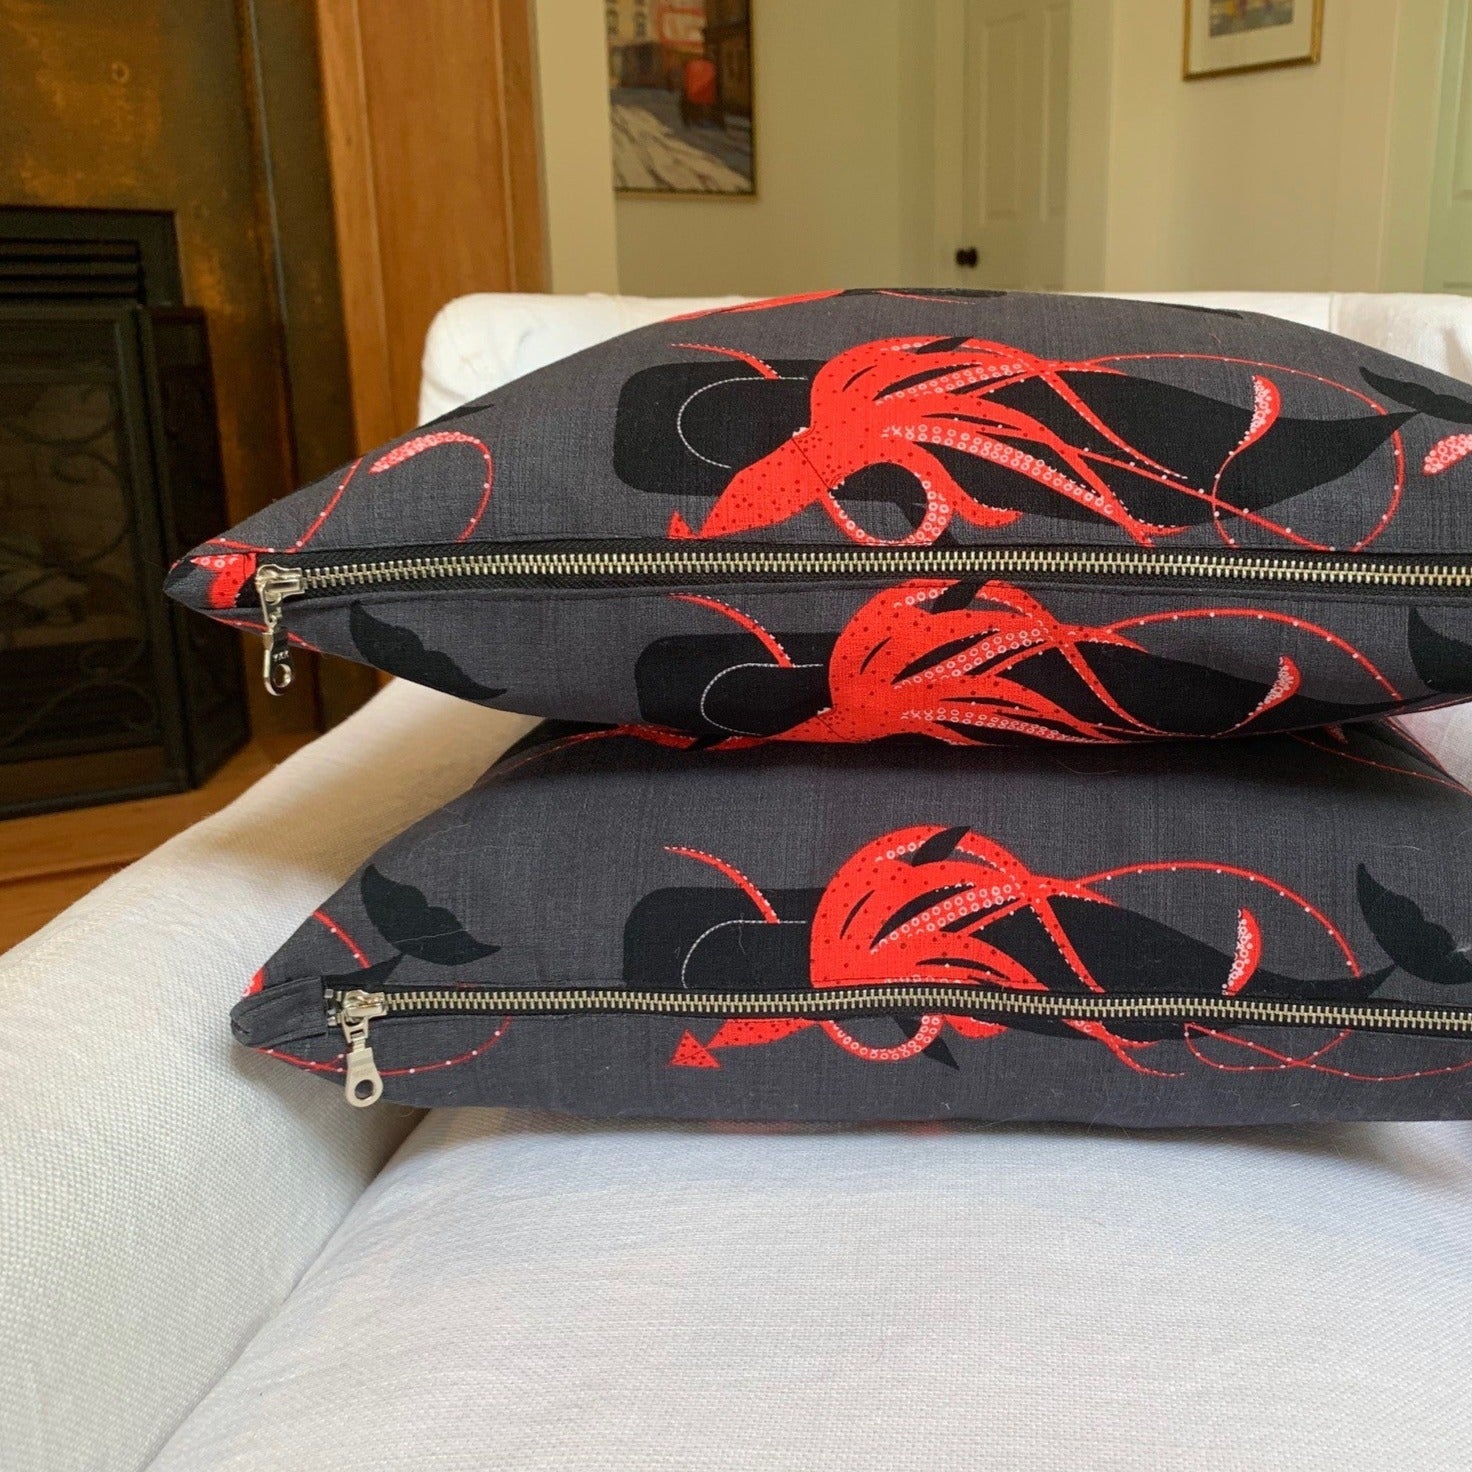 pillow cover is handmade from 100% certified organic cotton printed with Modernist artist Charley Harper’s Squid and Whale design. The pillow features an exposed YKK zipper. The striking colors will enliven your home, office, or outdoor space.